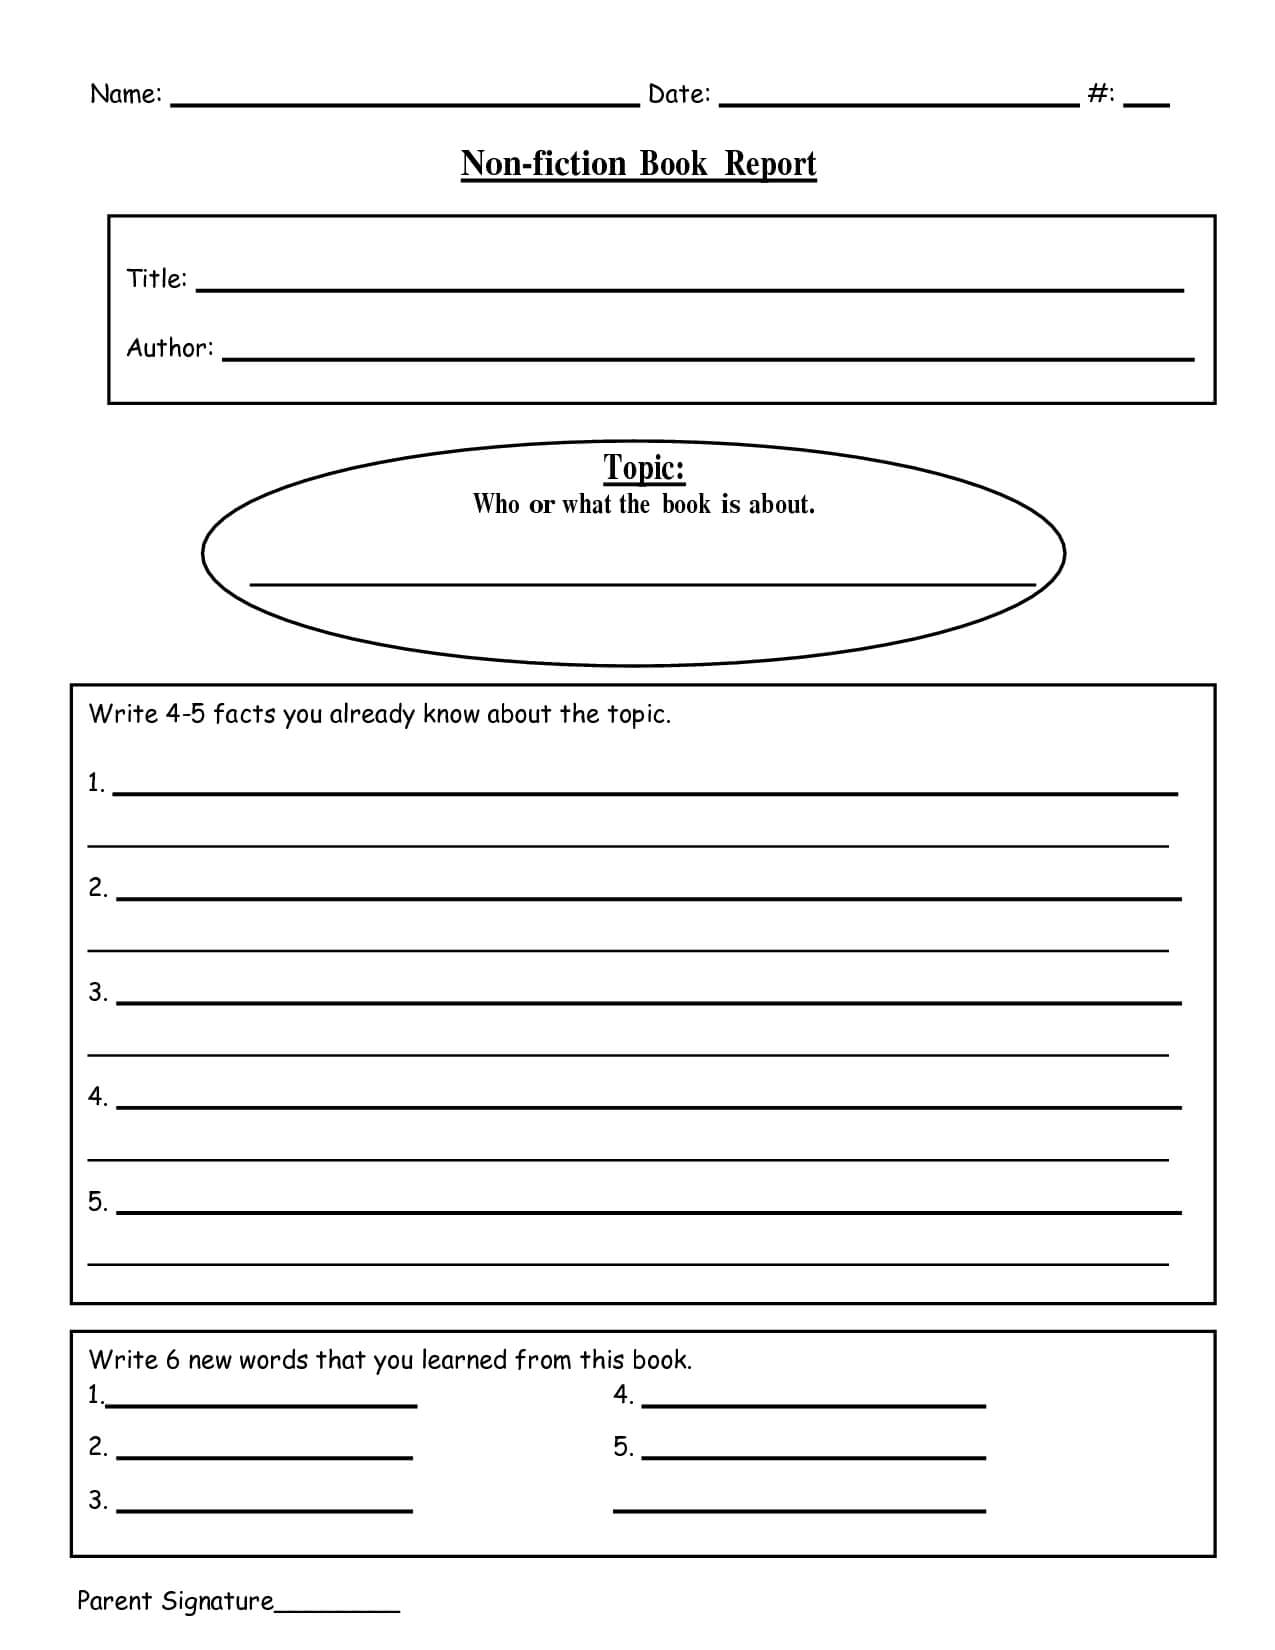 28 Images Of 5Th Grade Non Fiction Book Report Template Within Book Report Template 5Th Grade